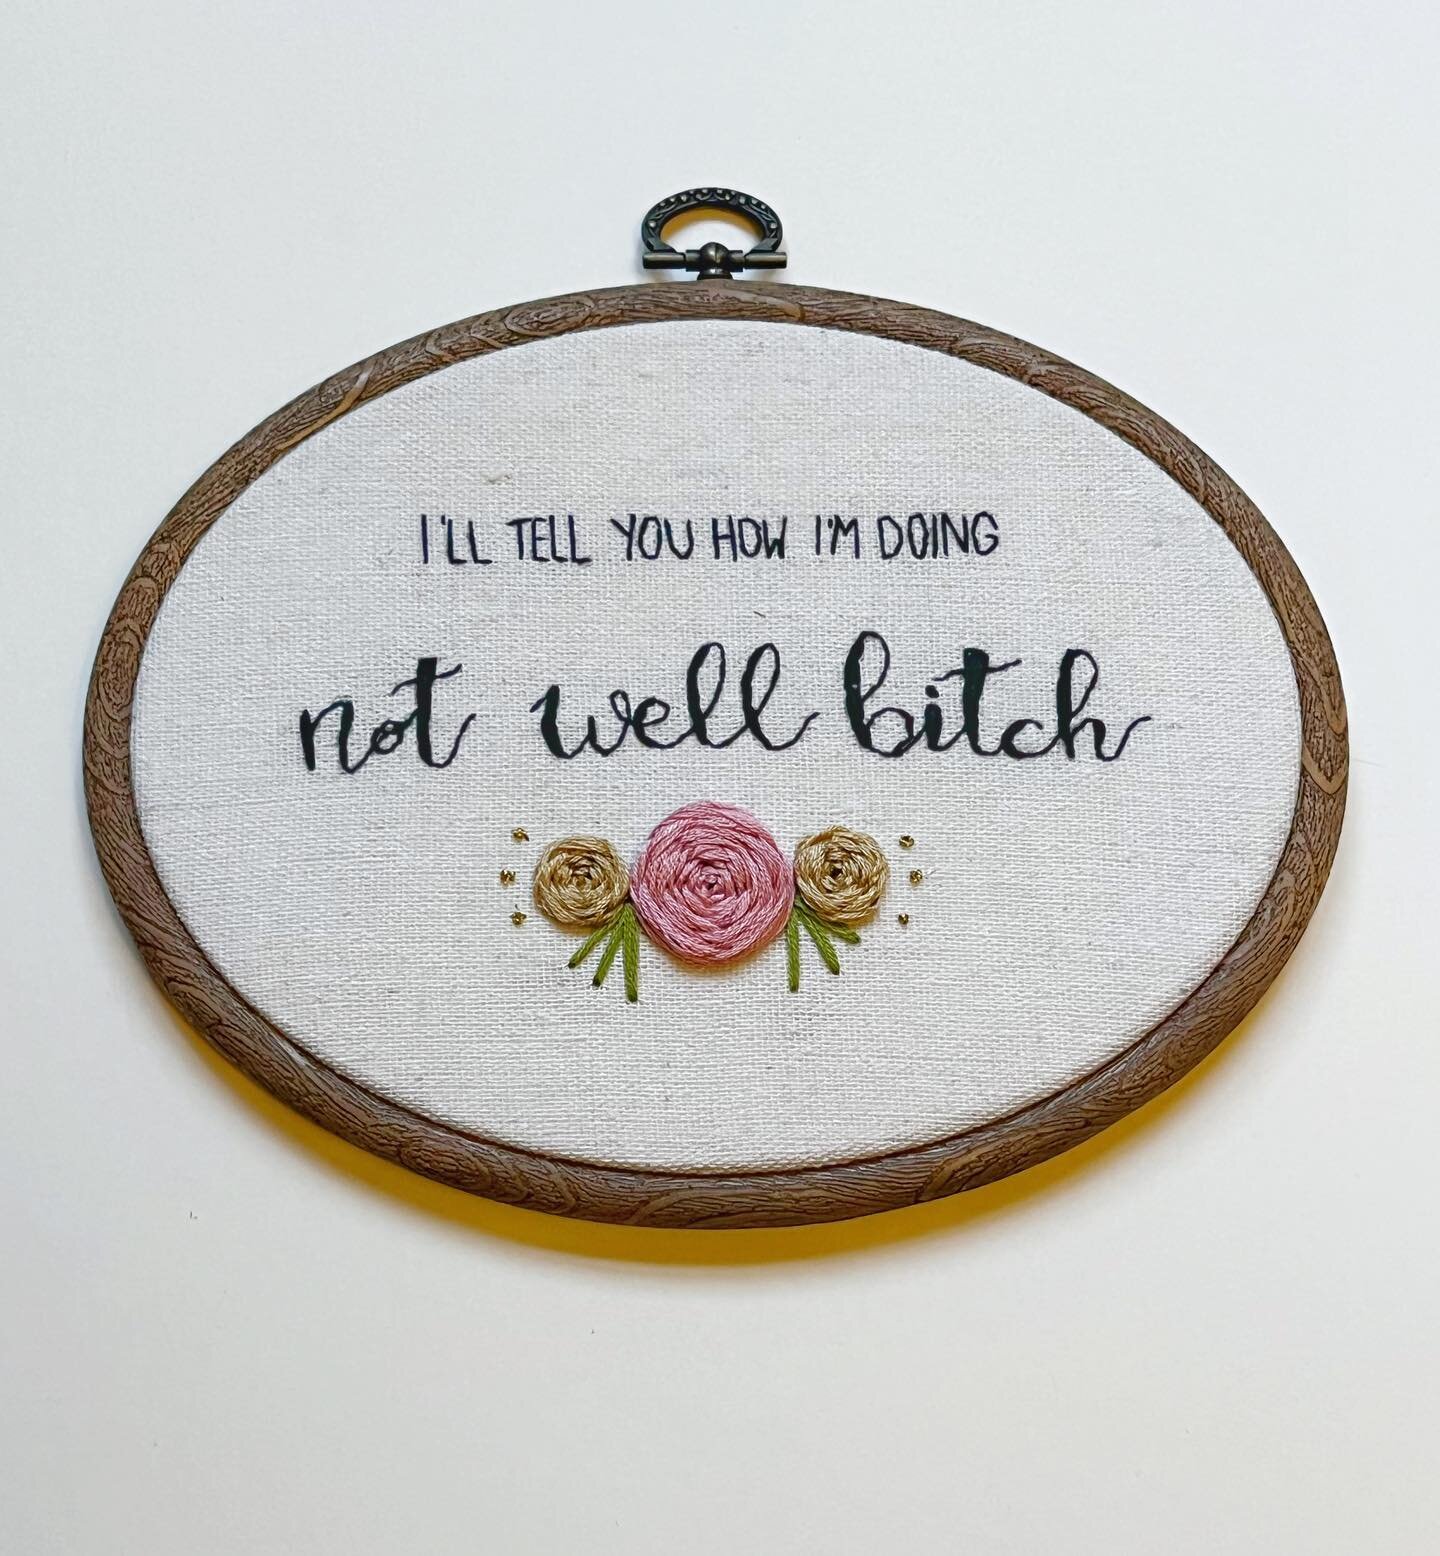 It&rsquo;s starting to concern me how long I&rsquo;ve been able to post this hoop with the caption &lsquo;mood&rsquo;. When will I be doing well, bitch?! 🥲